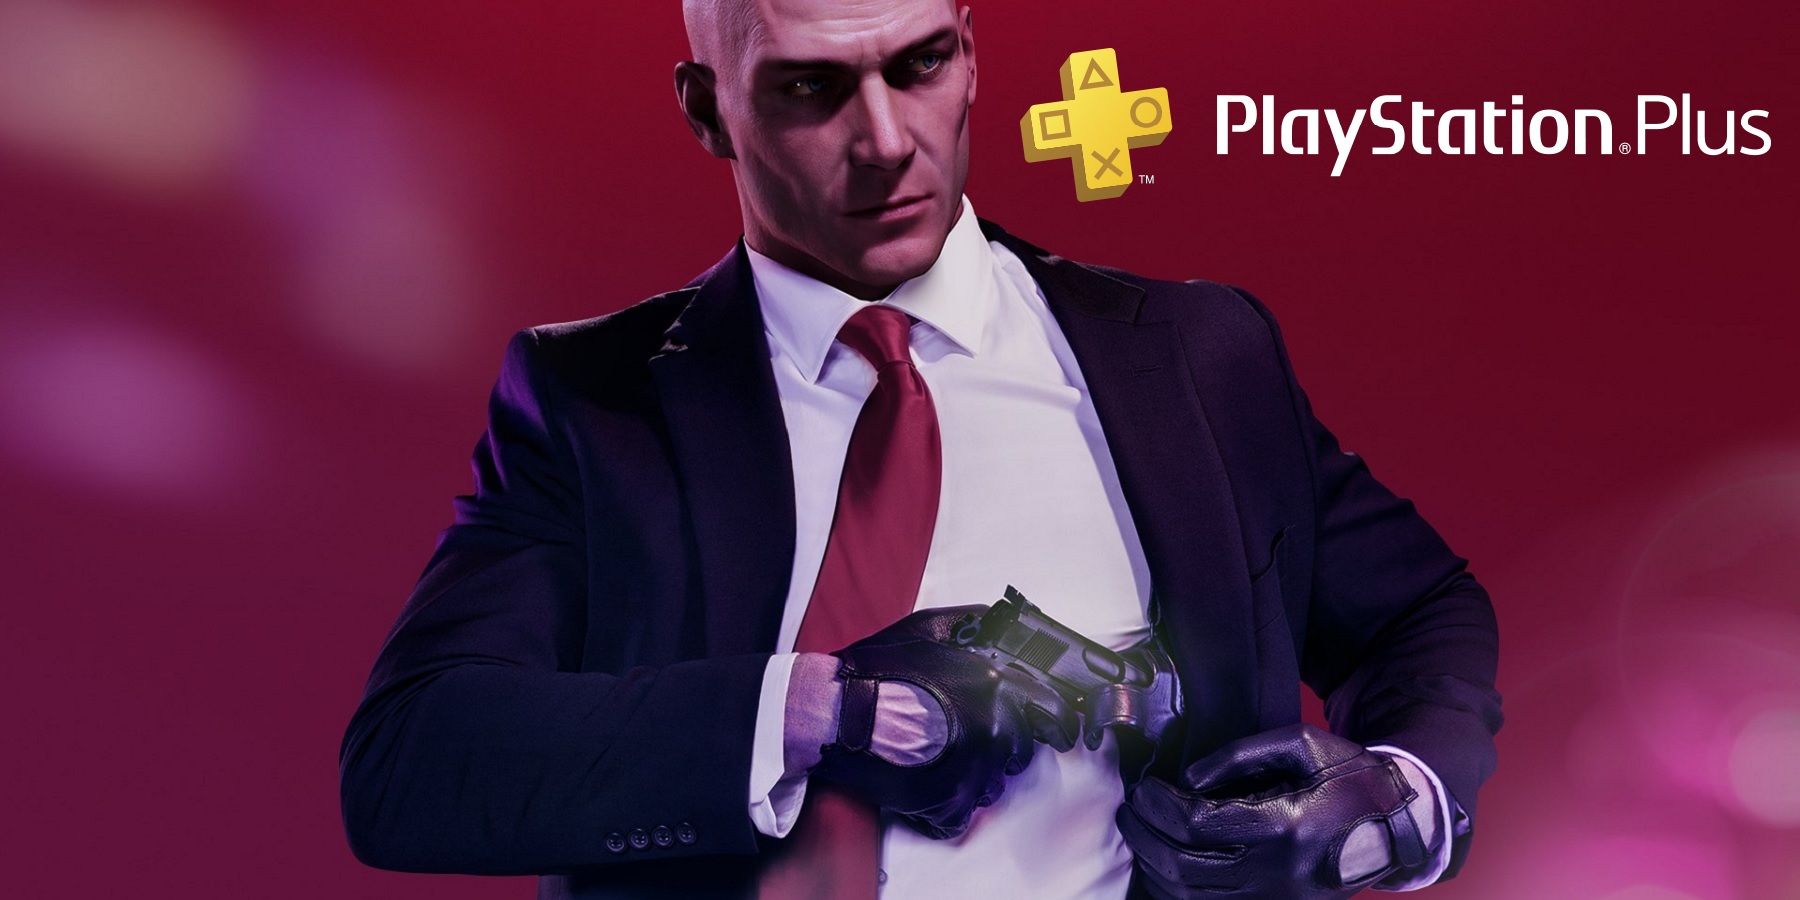 hitman 2 agent 47 with playstation plus logo